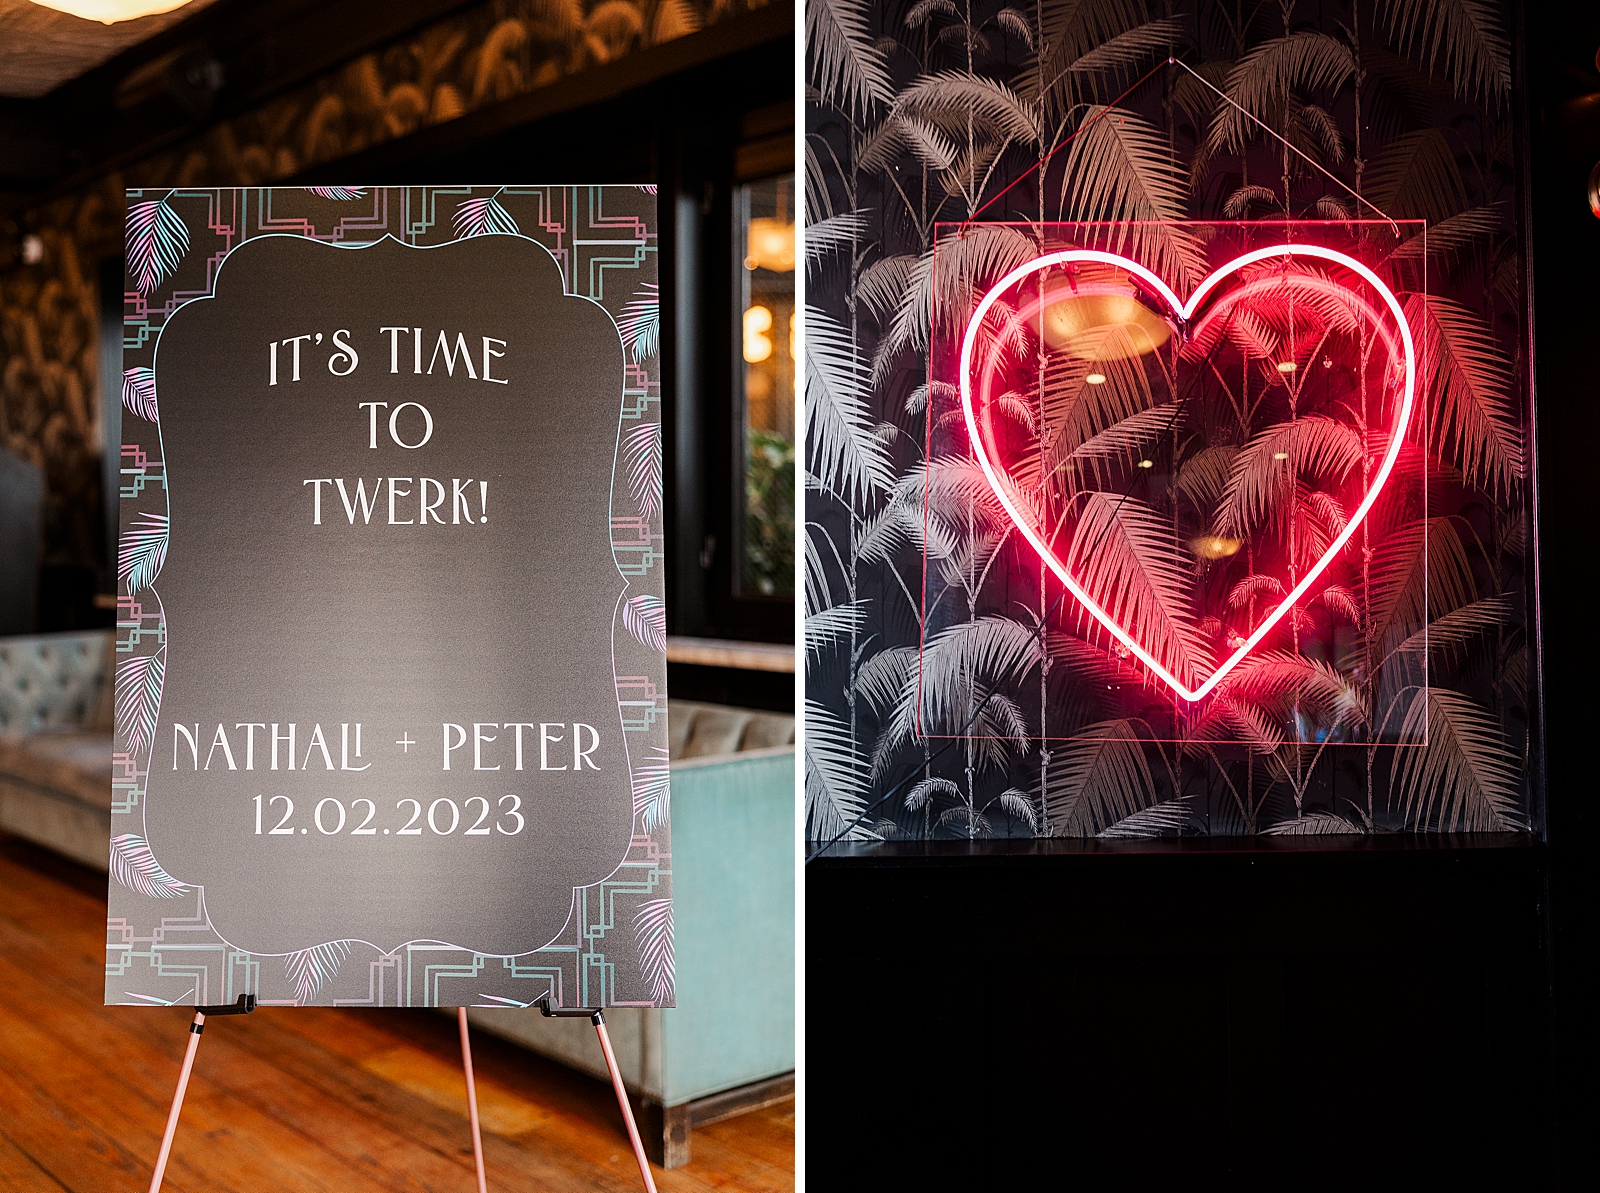 Left photo: Shot of the wedding welcome sign which says, "it's time to twerk," as well as the couple's names and their wedding date. 
Right photo: Shot of a pink florescent light heart sign hanging from the wall. 